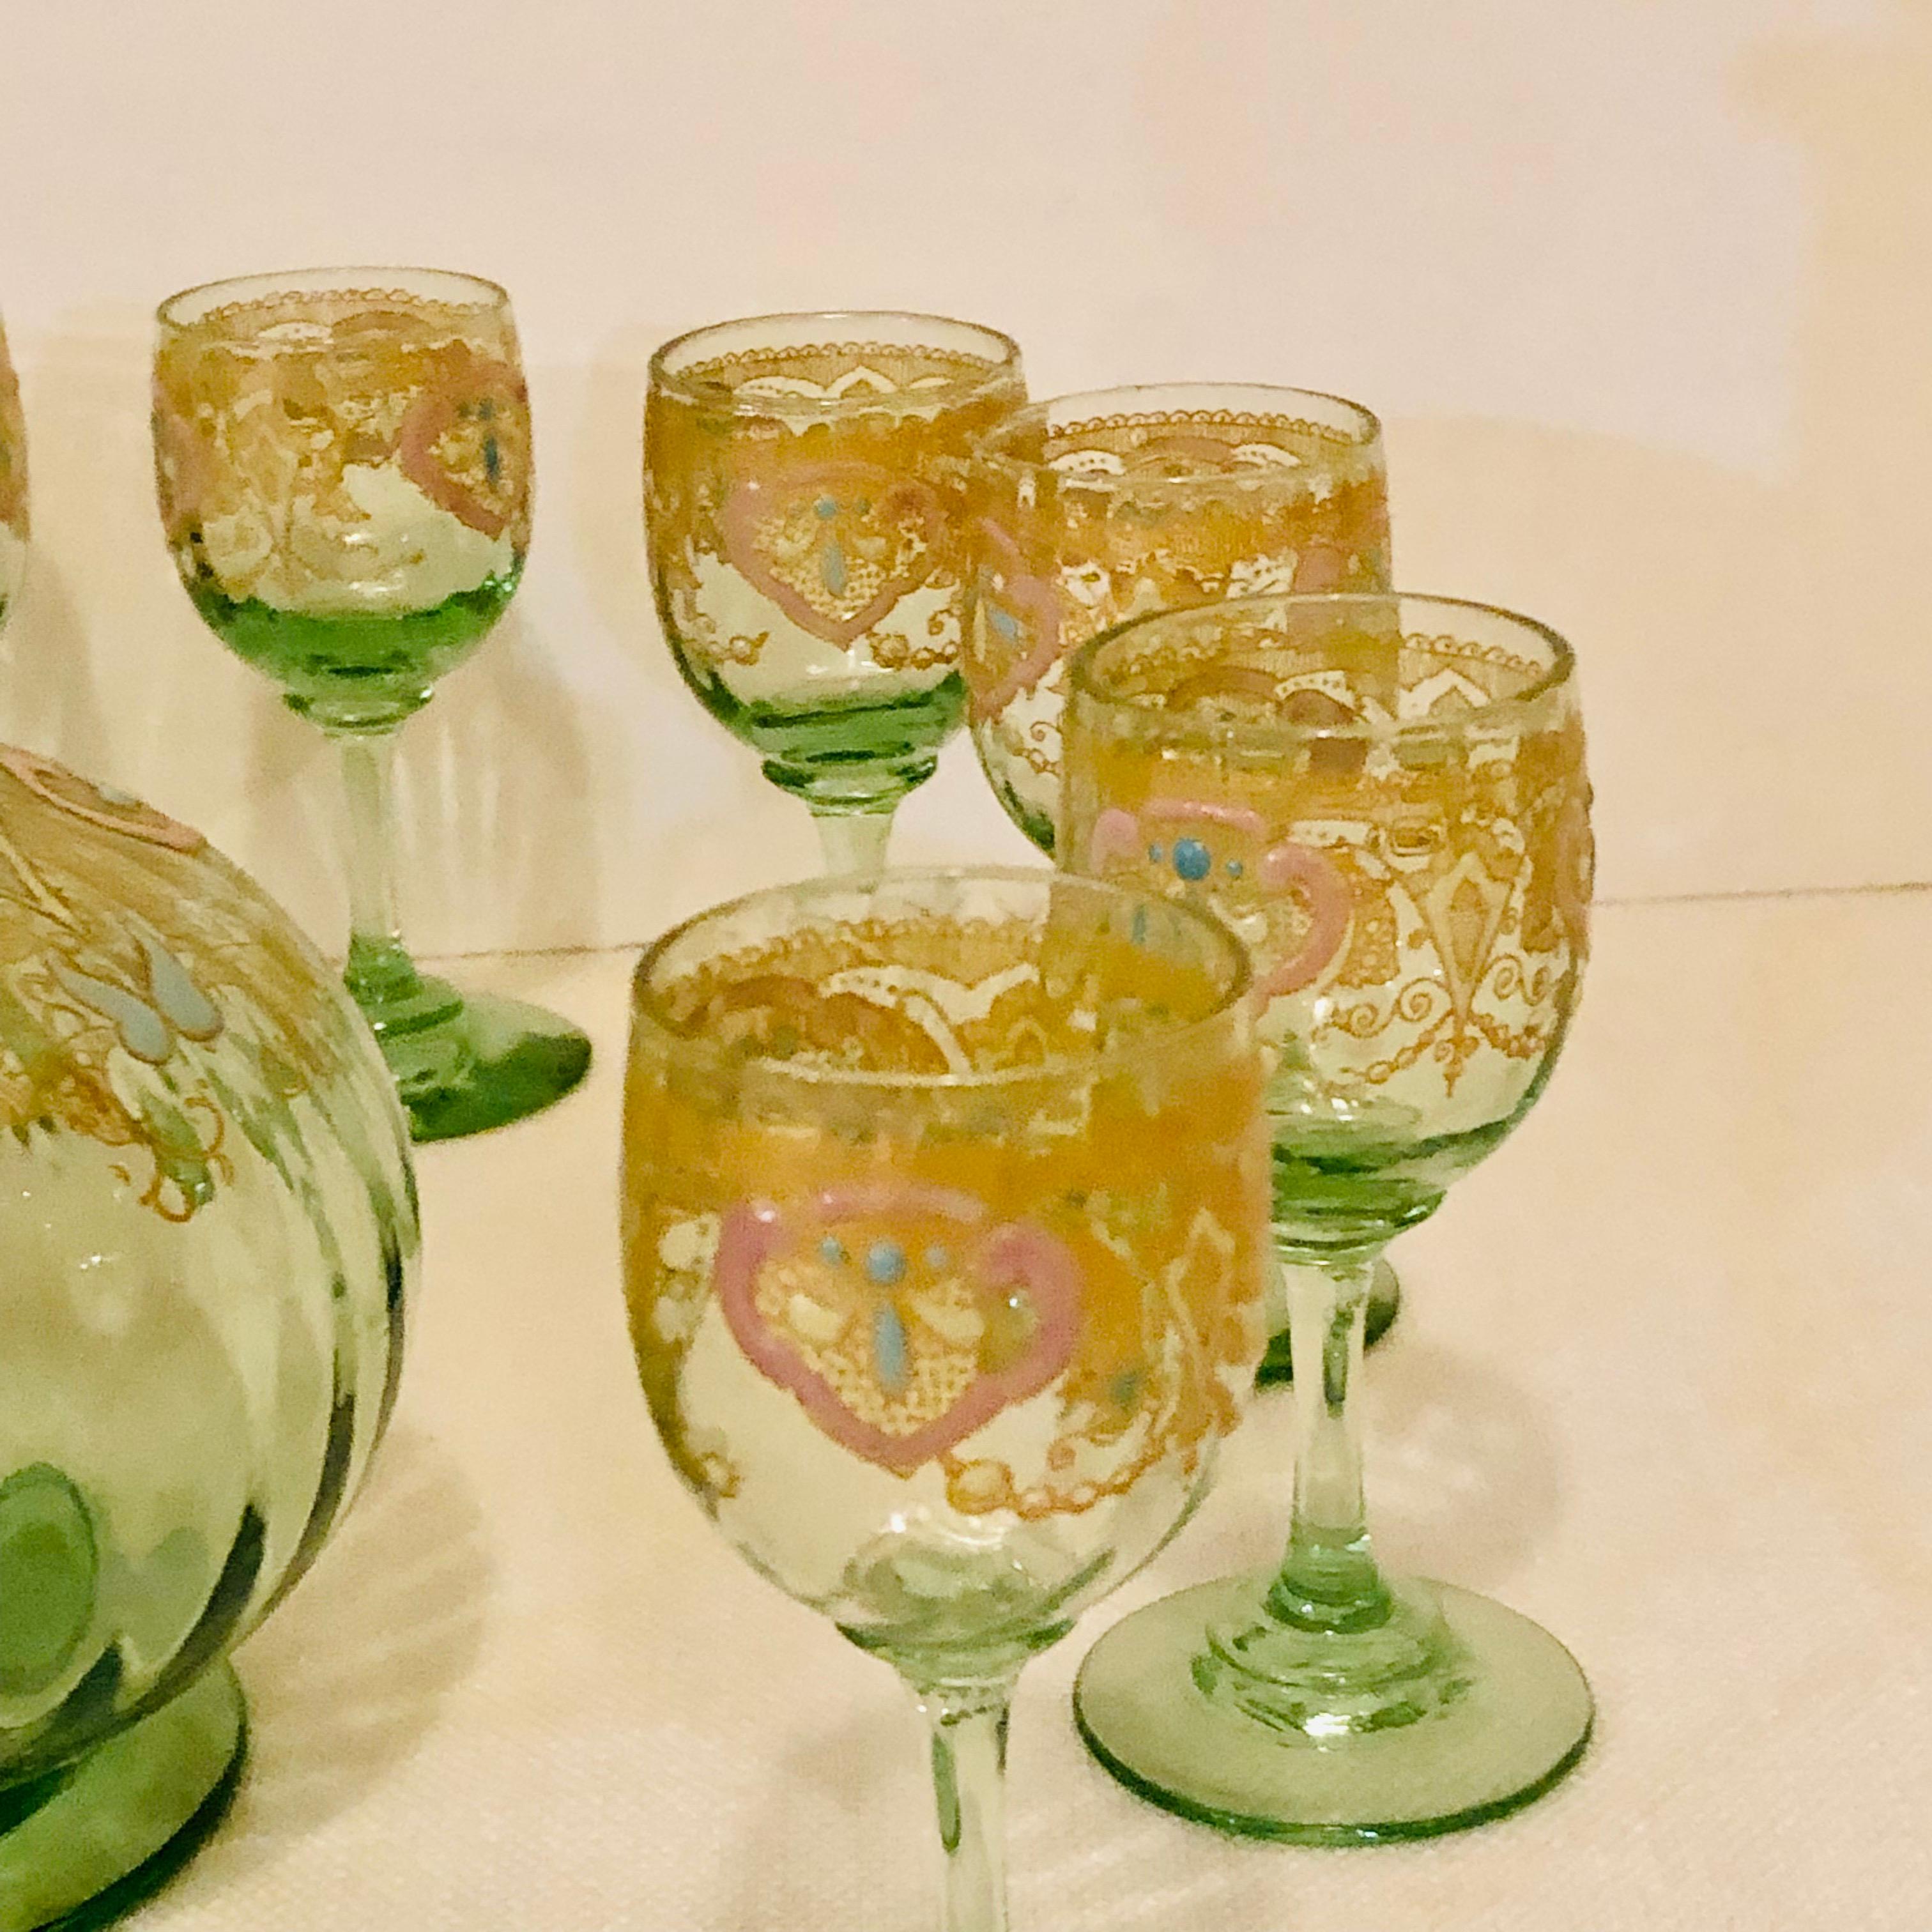 Blown Glass Venetian Decanter With Ten Venetian Cordial Glasses With Colorful Enamel Accents